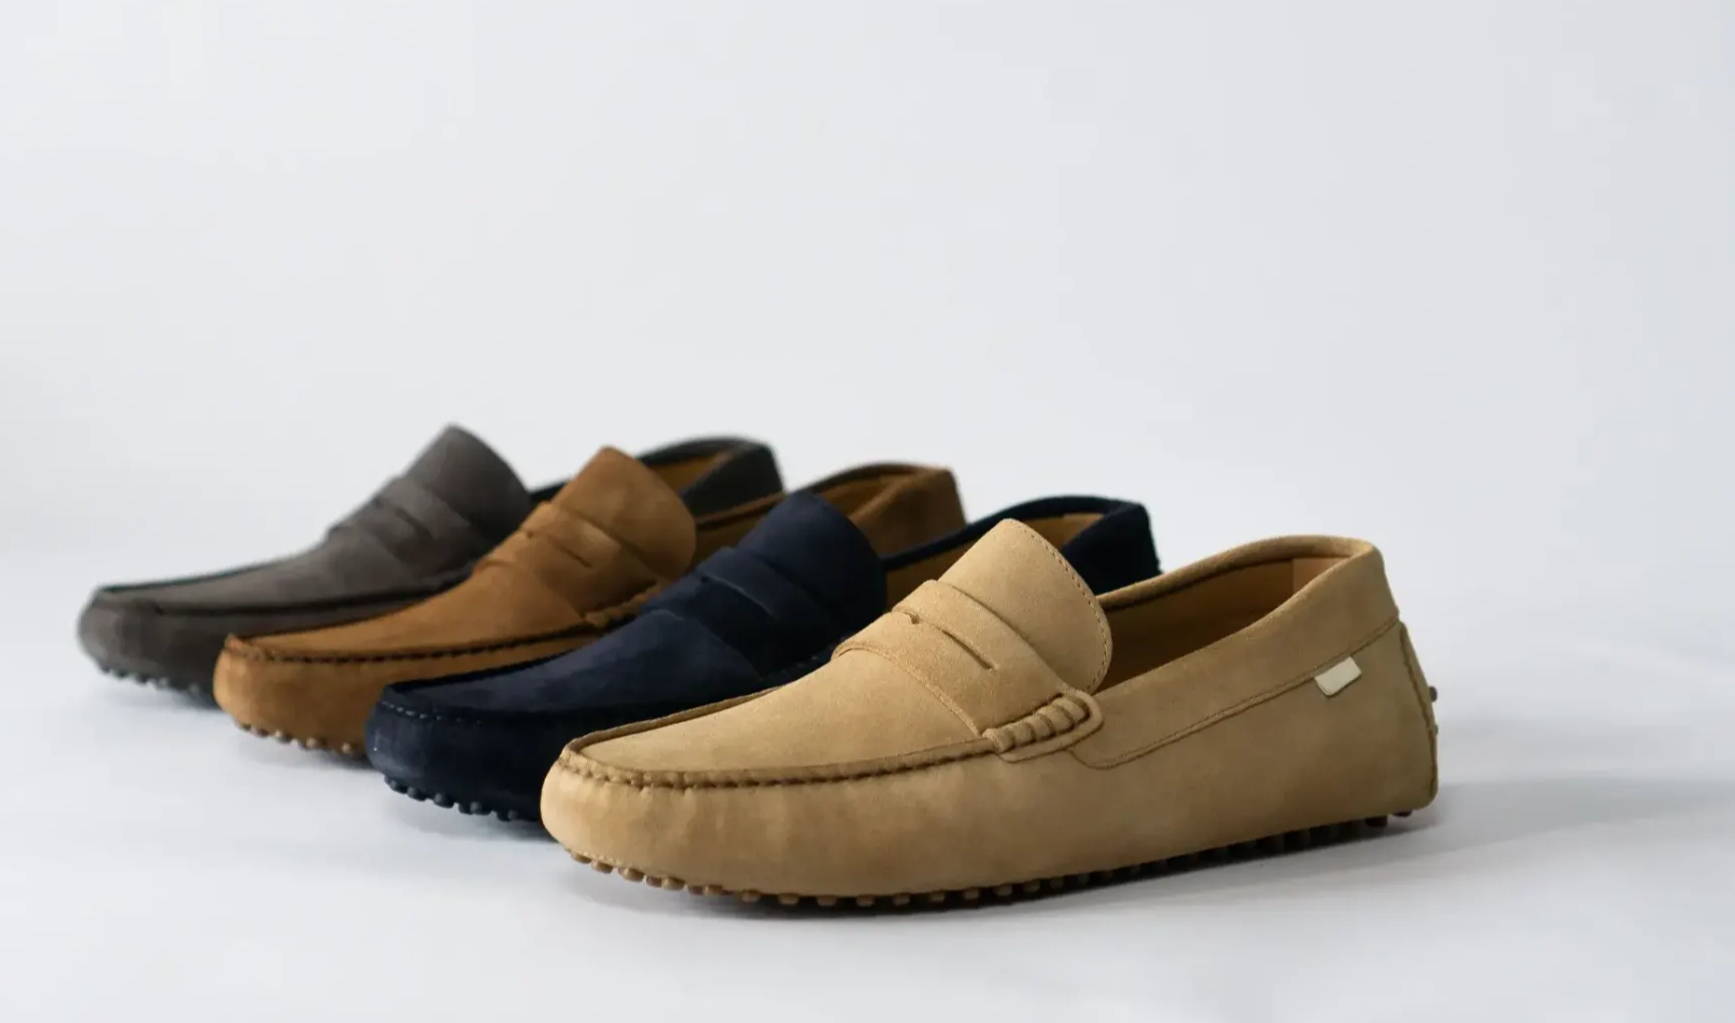 Fashion Men's Casual Driving Loafers Suede Leather Moccasins Slip On Penny Shoes 